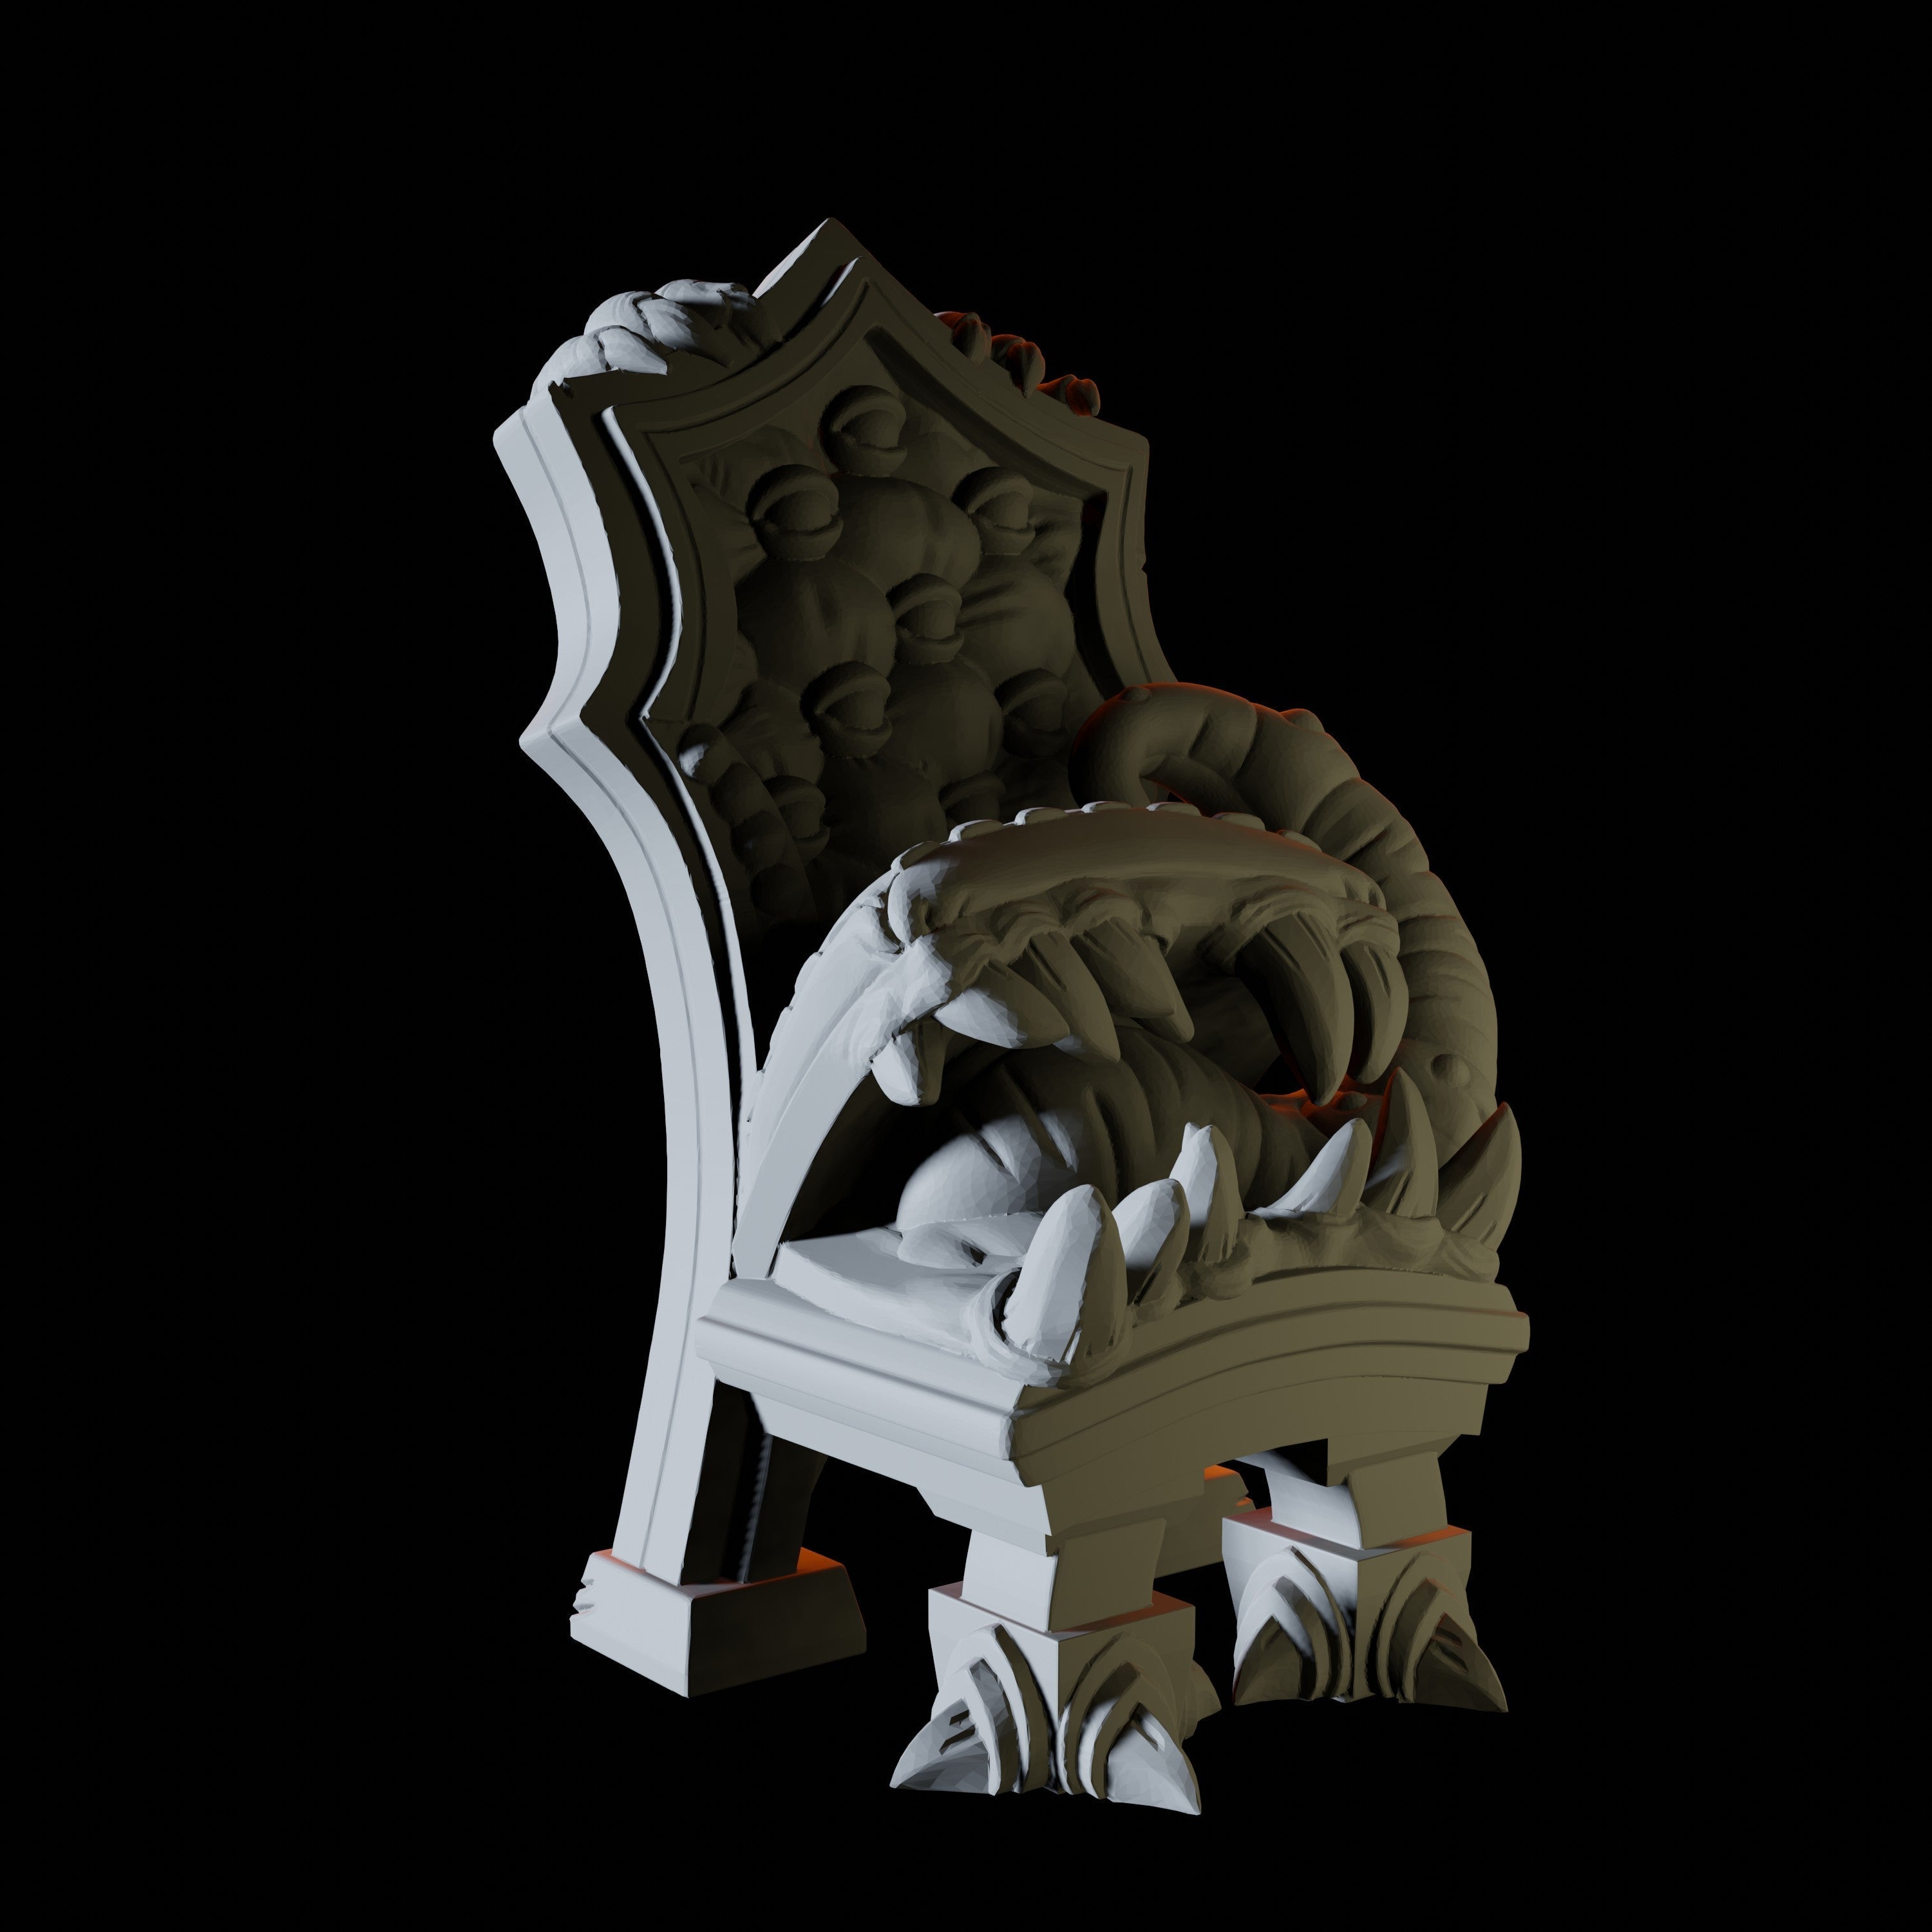 Chair Mimic Miniature for Dungeons and Dragons